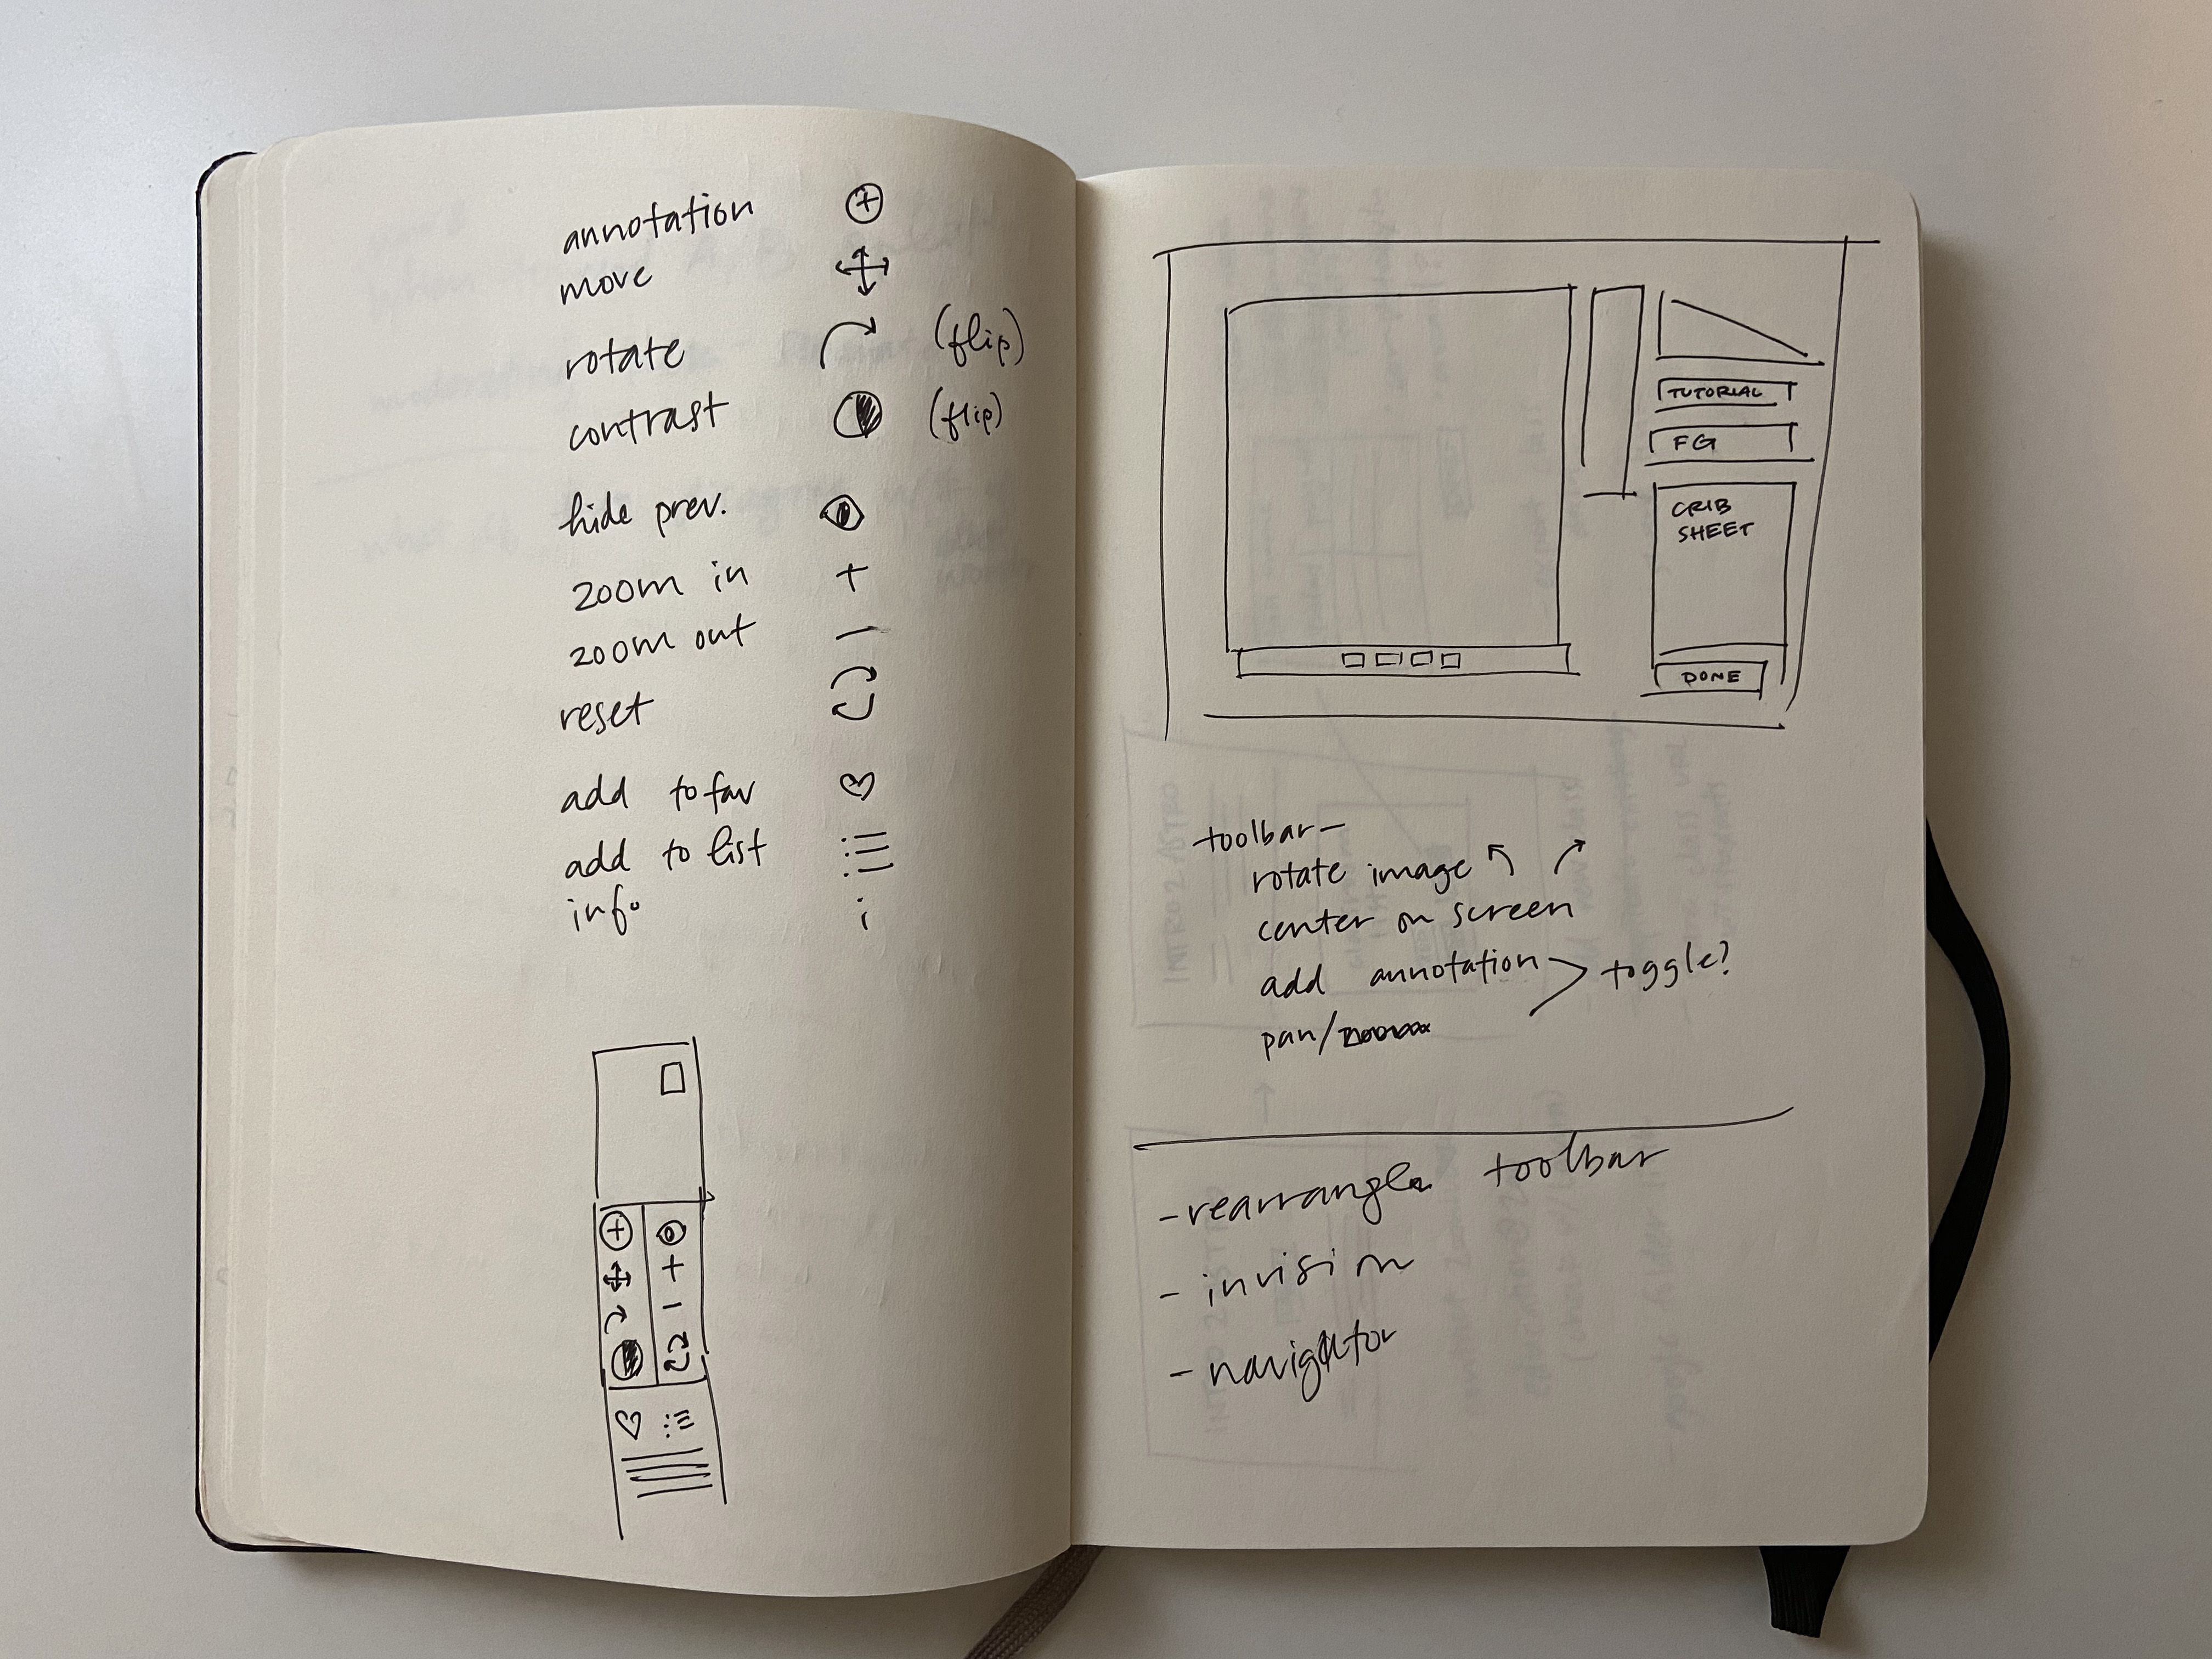 A photo of an open notebook showing sketches of a web page, toolbar icons, and handwritten notes.